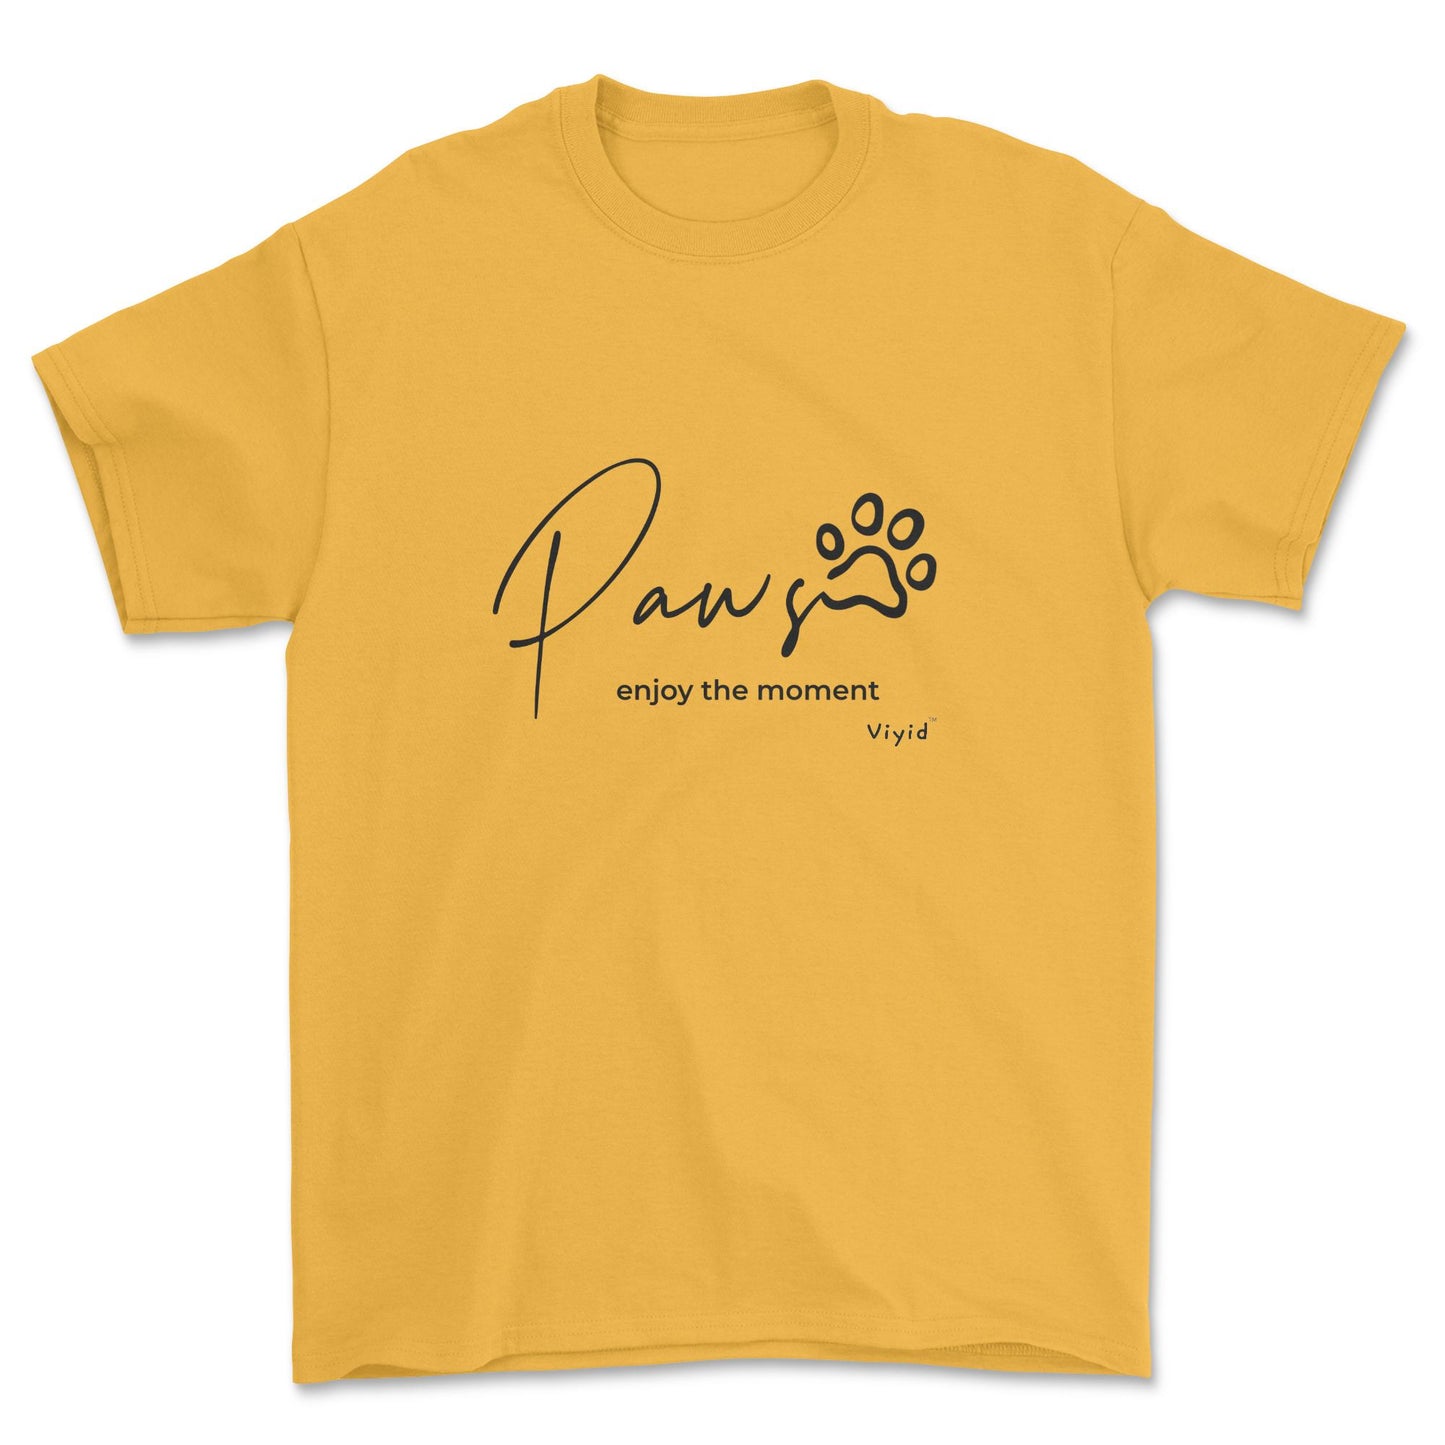 paws enjoy the moment adult t-shirt gold